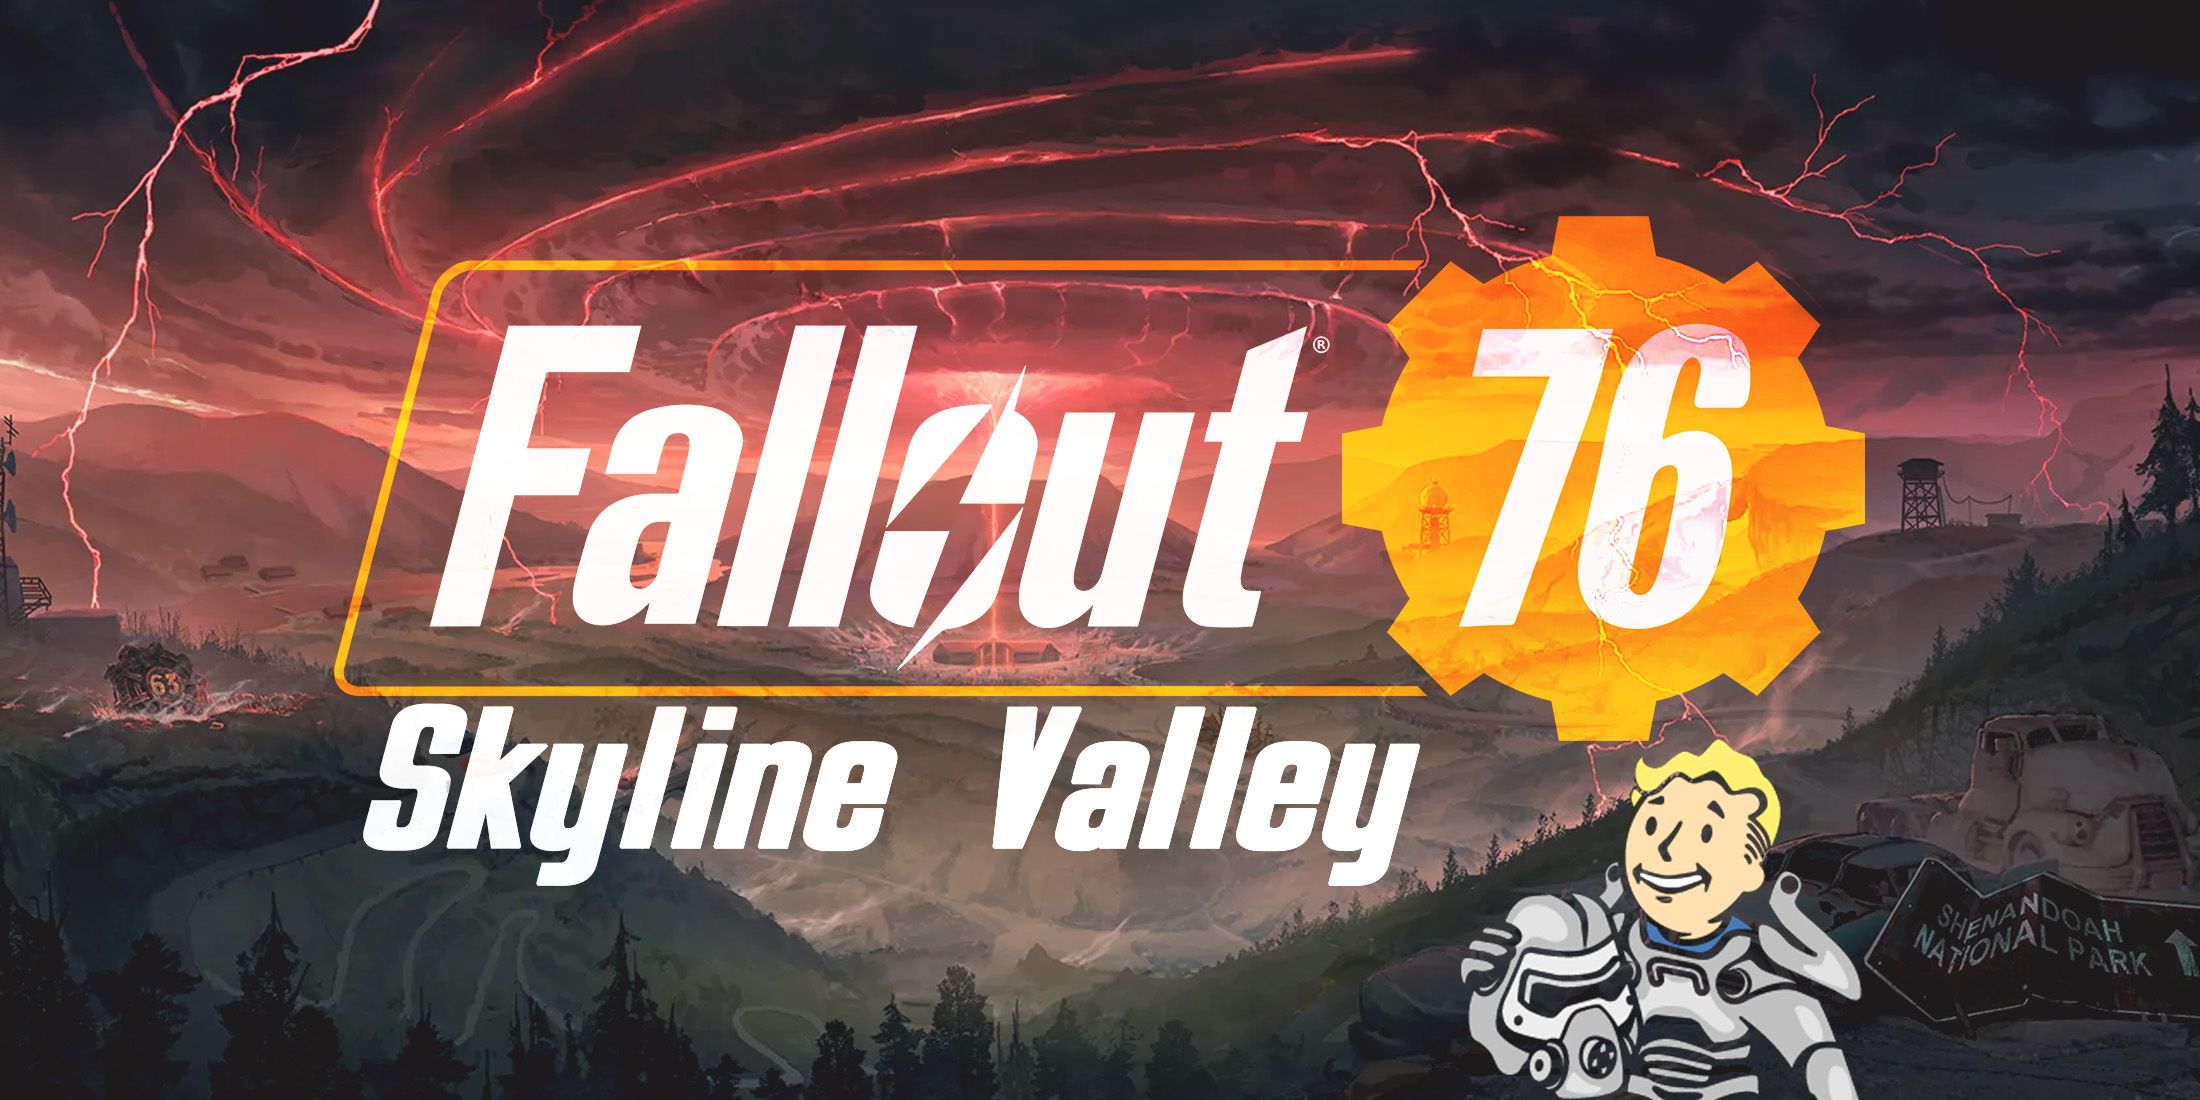 amazon, microsoft, fallout 76 shares developer preview of massive skyline valley update